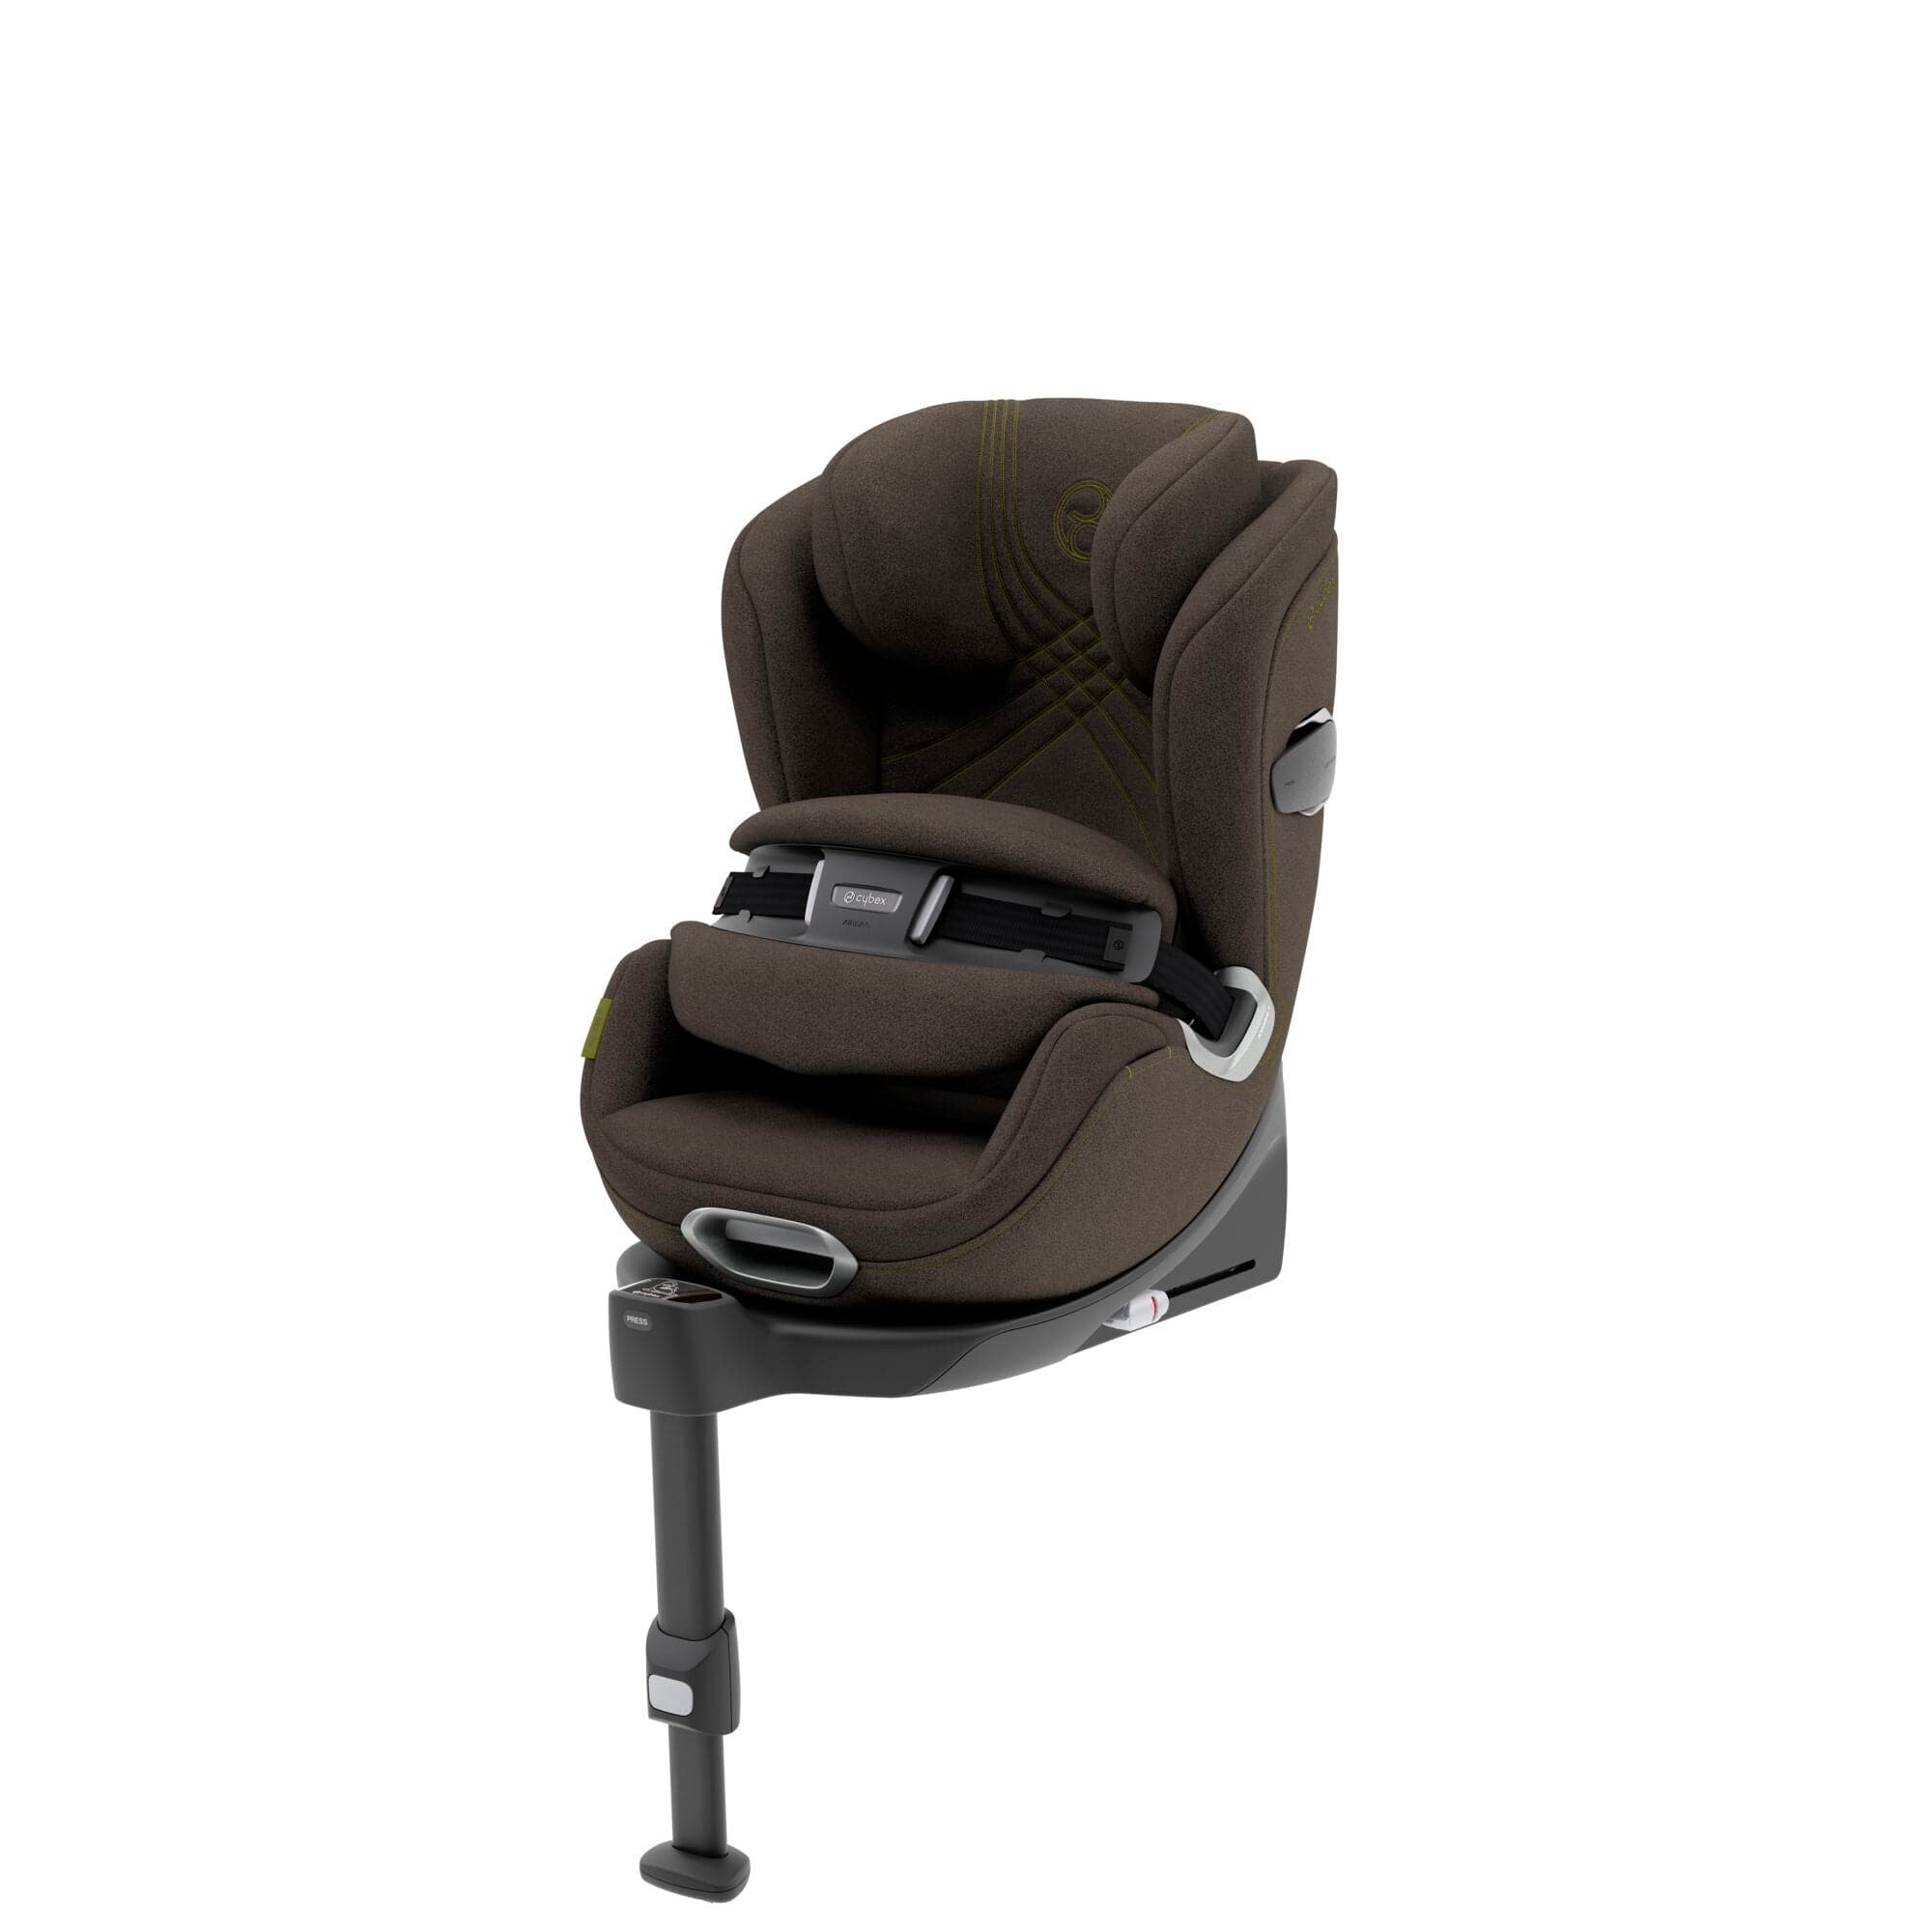 Cybex Anoris T i-Size Car Seat - Khaki Green - For Your Little One